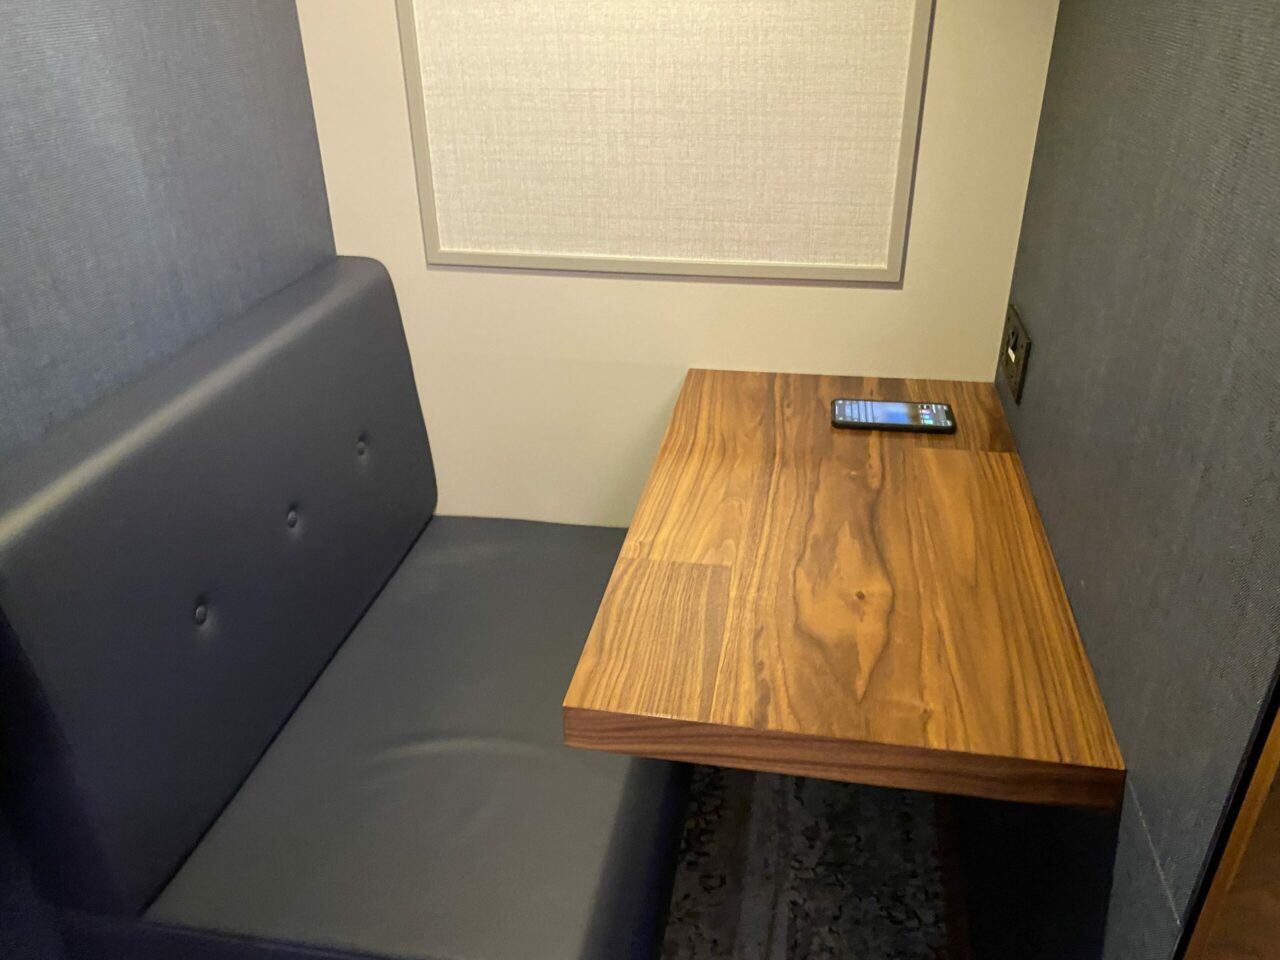 American Express New Centurion Lounge table 